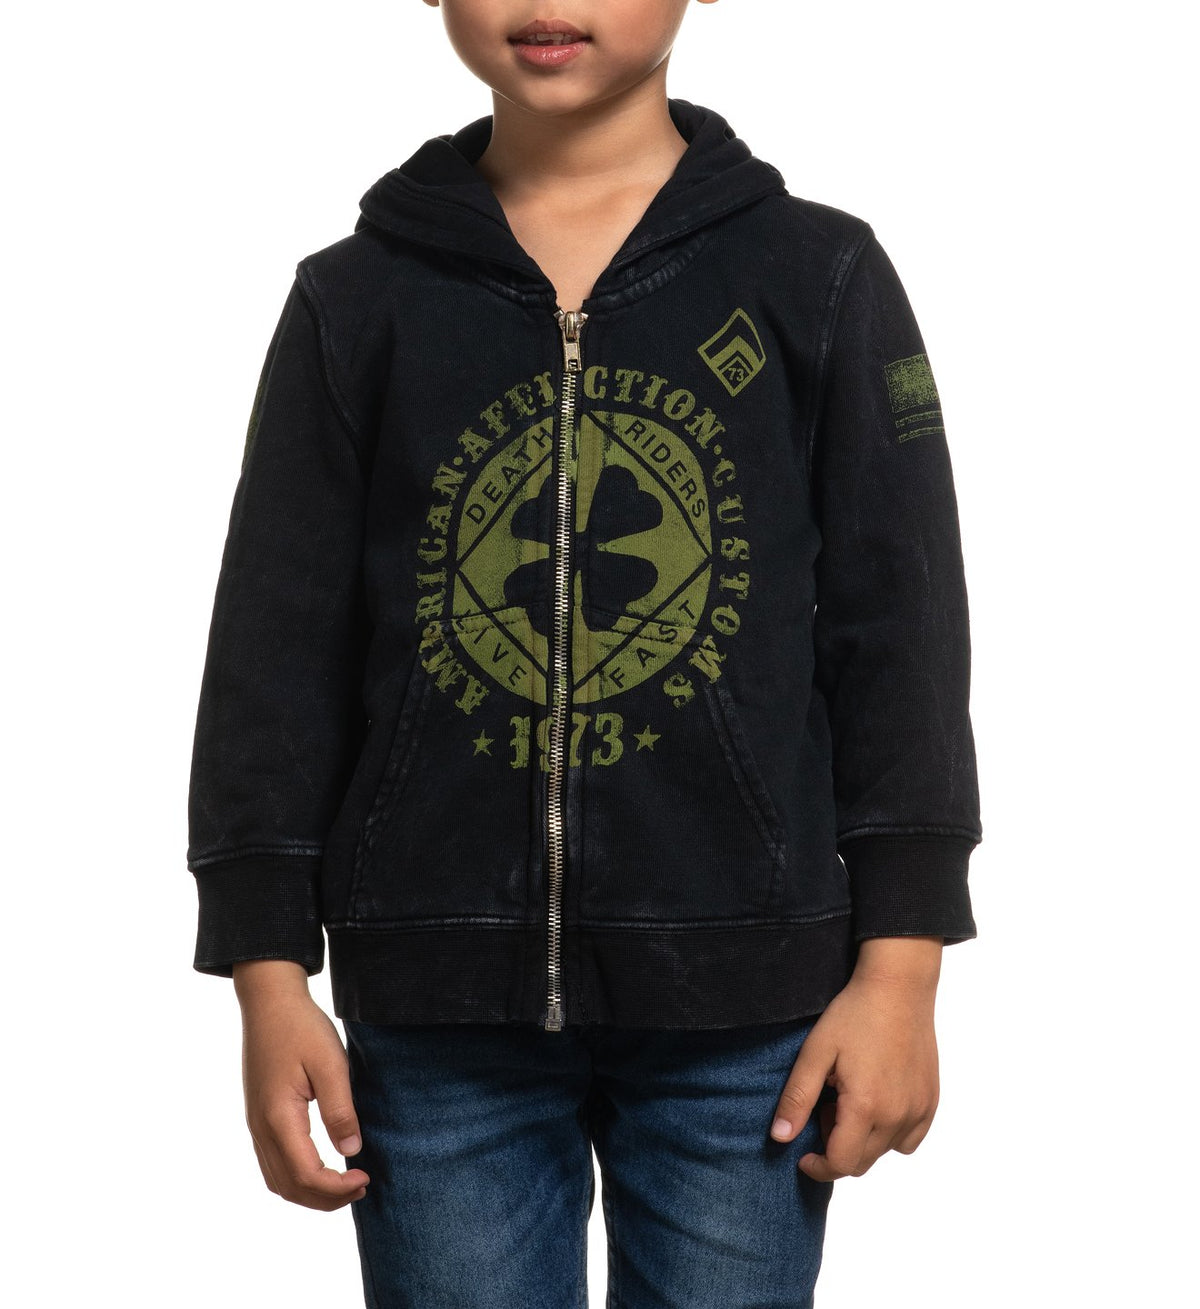 Lucky Shot Zip Hood-Toddler - Toddlers Hooded Sweatshirts - Affliction Clothing